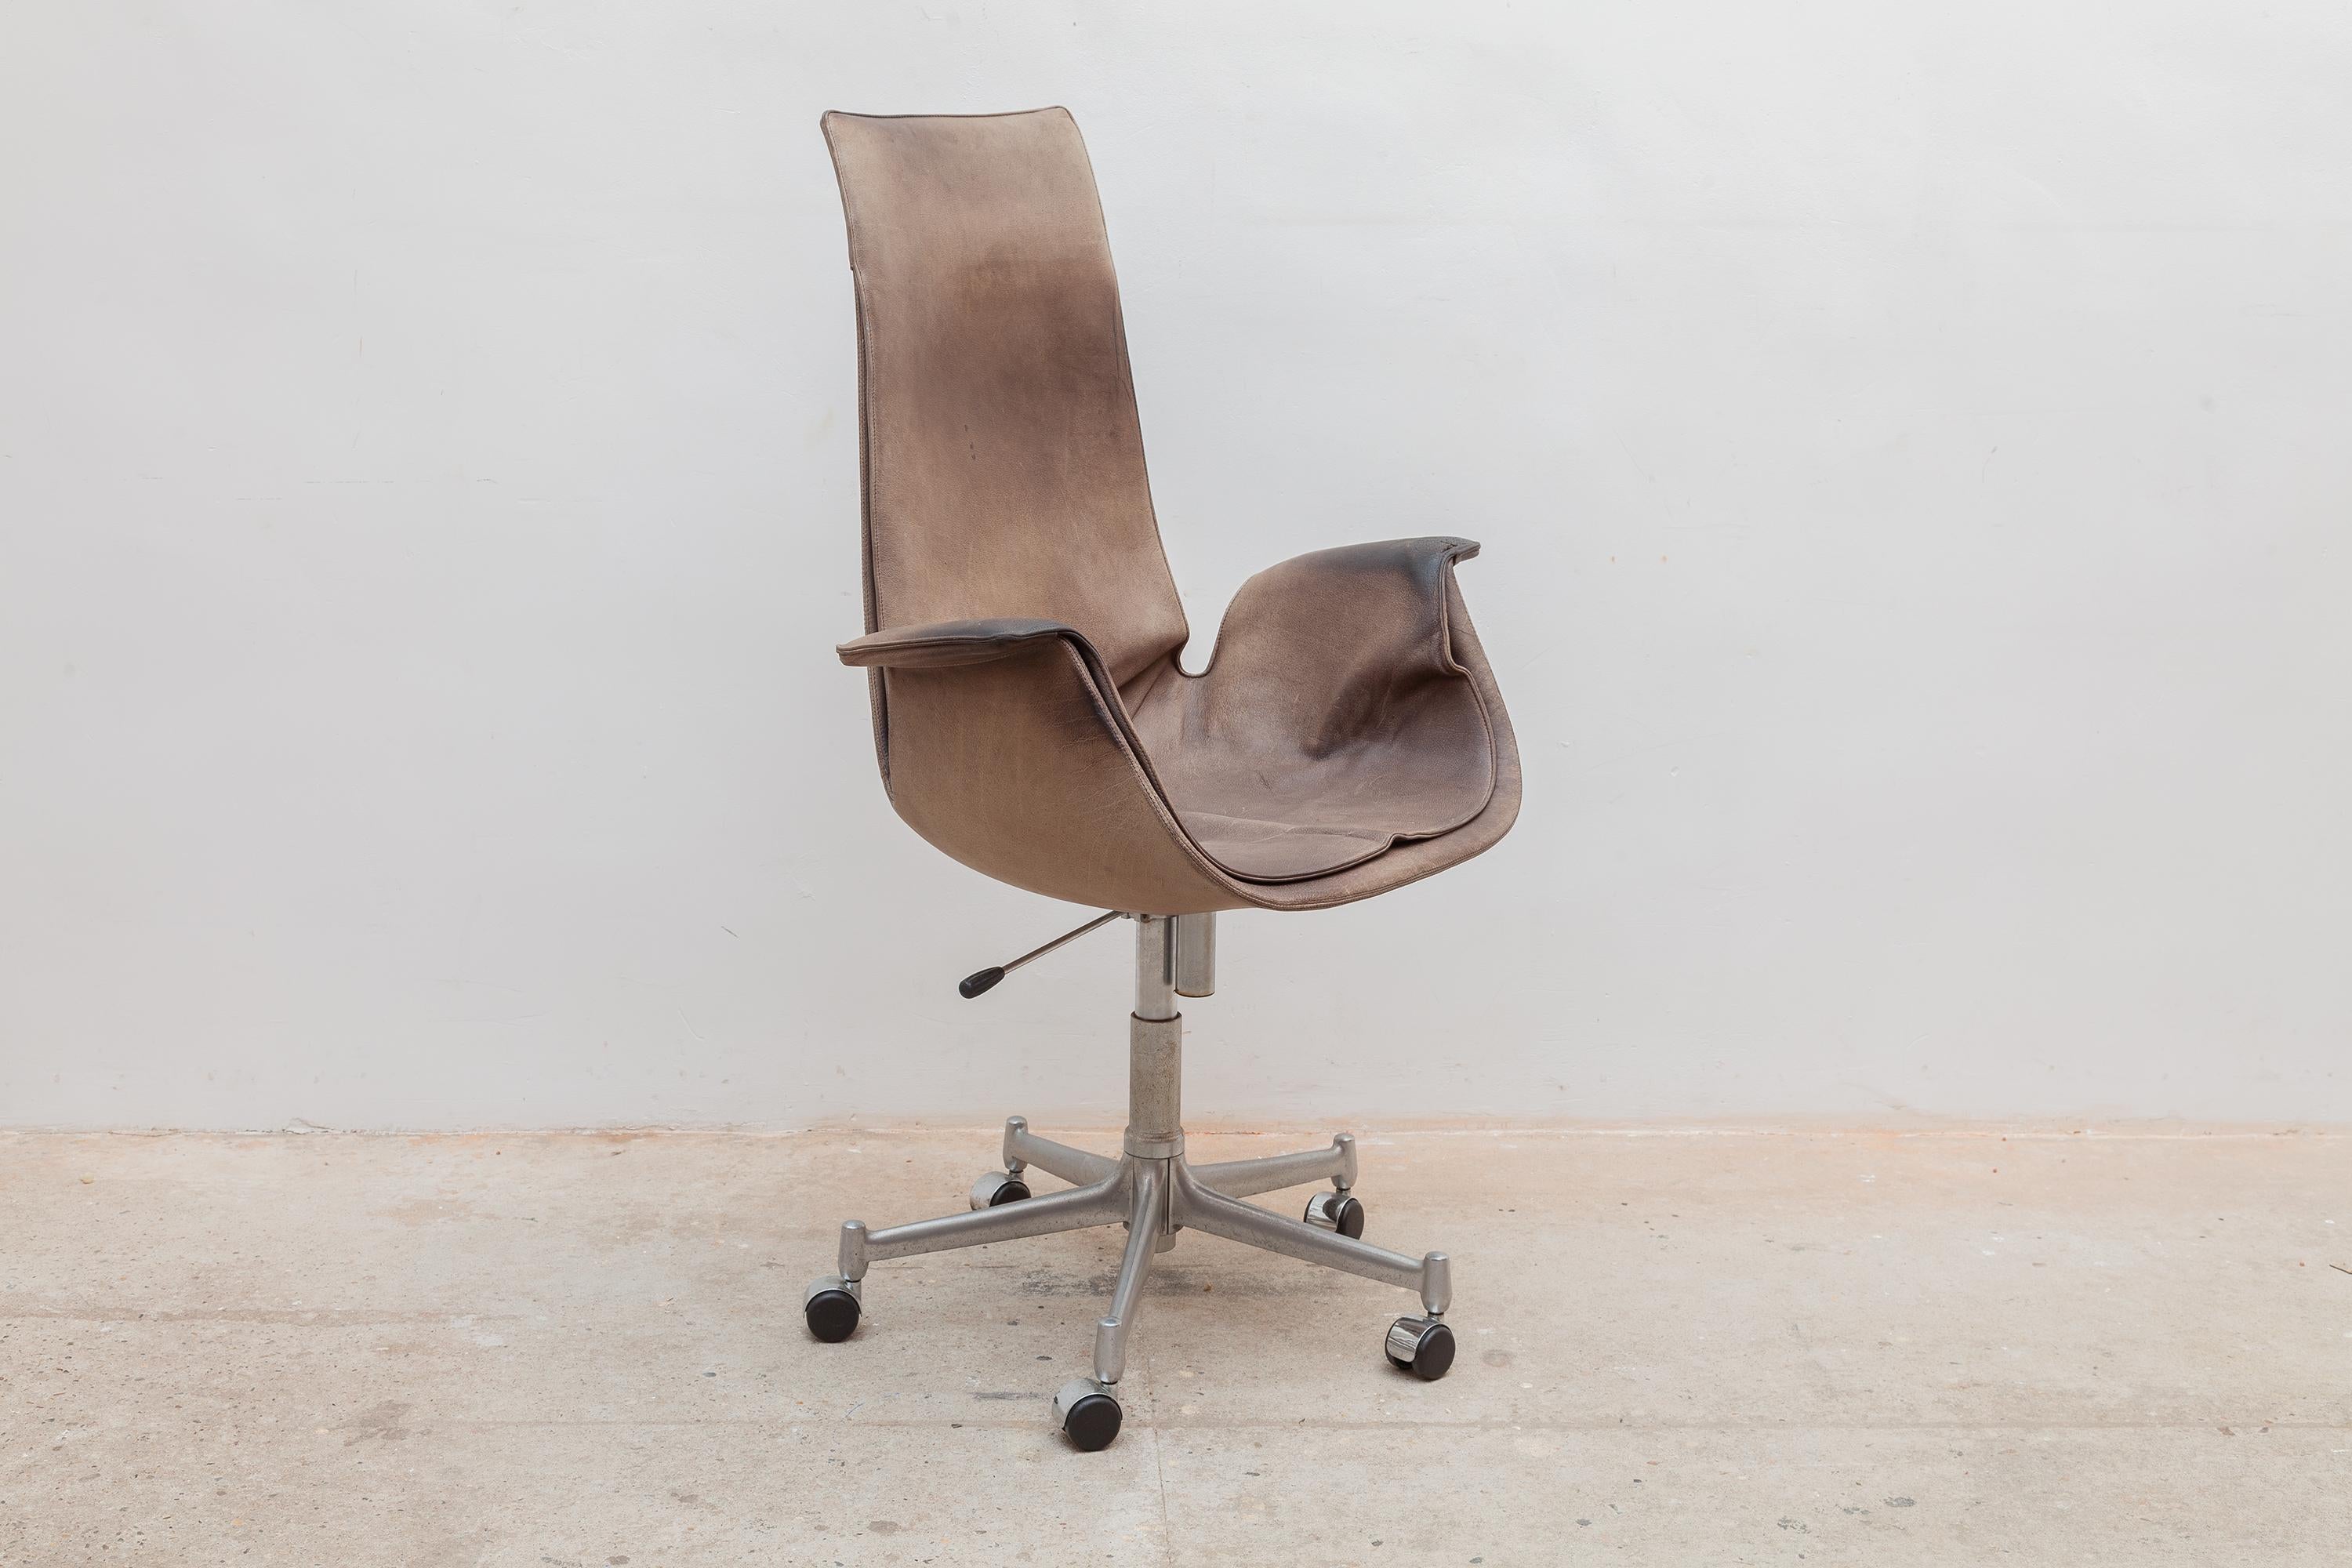 Adjustable high-back swivel K6727 model office chair by Jorgen Kastholm & Preben Fabricius for Kill International, 1960s in elephant grey leather. The condition of the chair is conform their age with a beautiful patina. The chair can be placed at